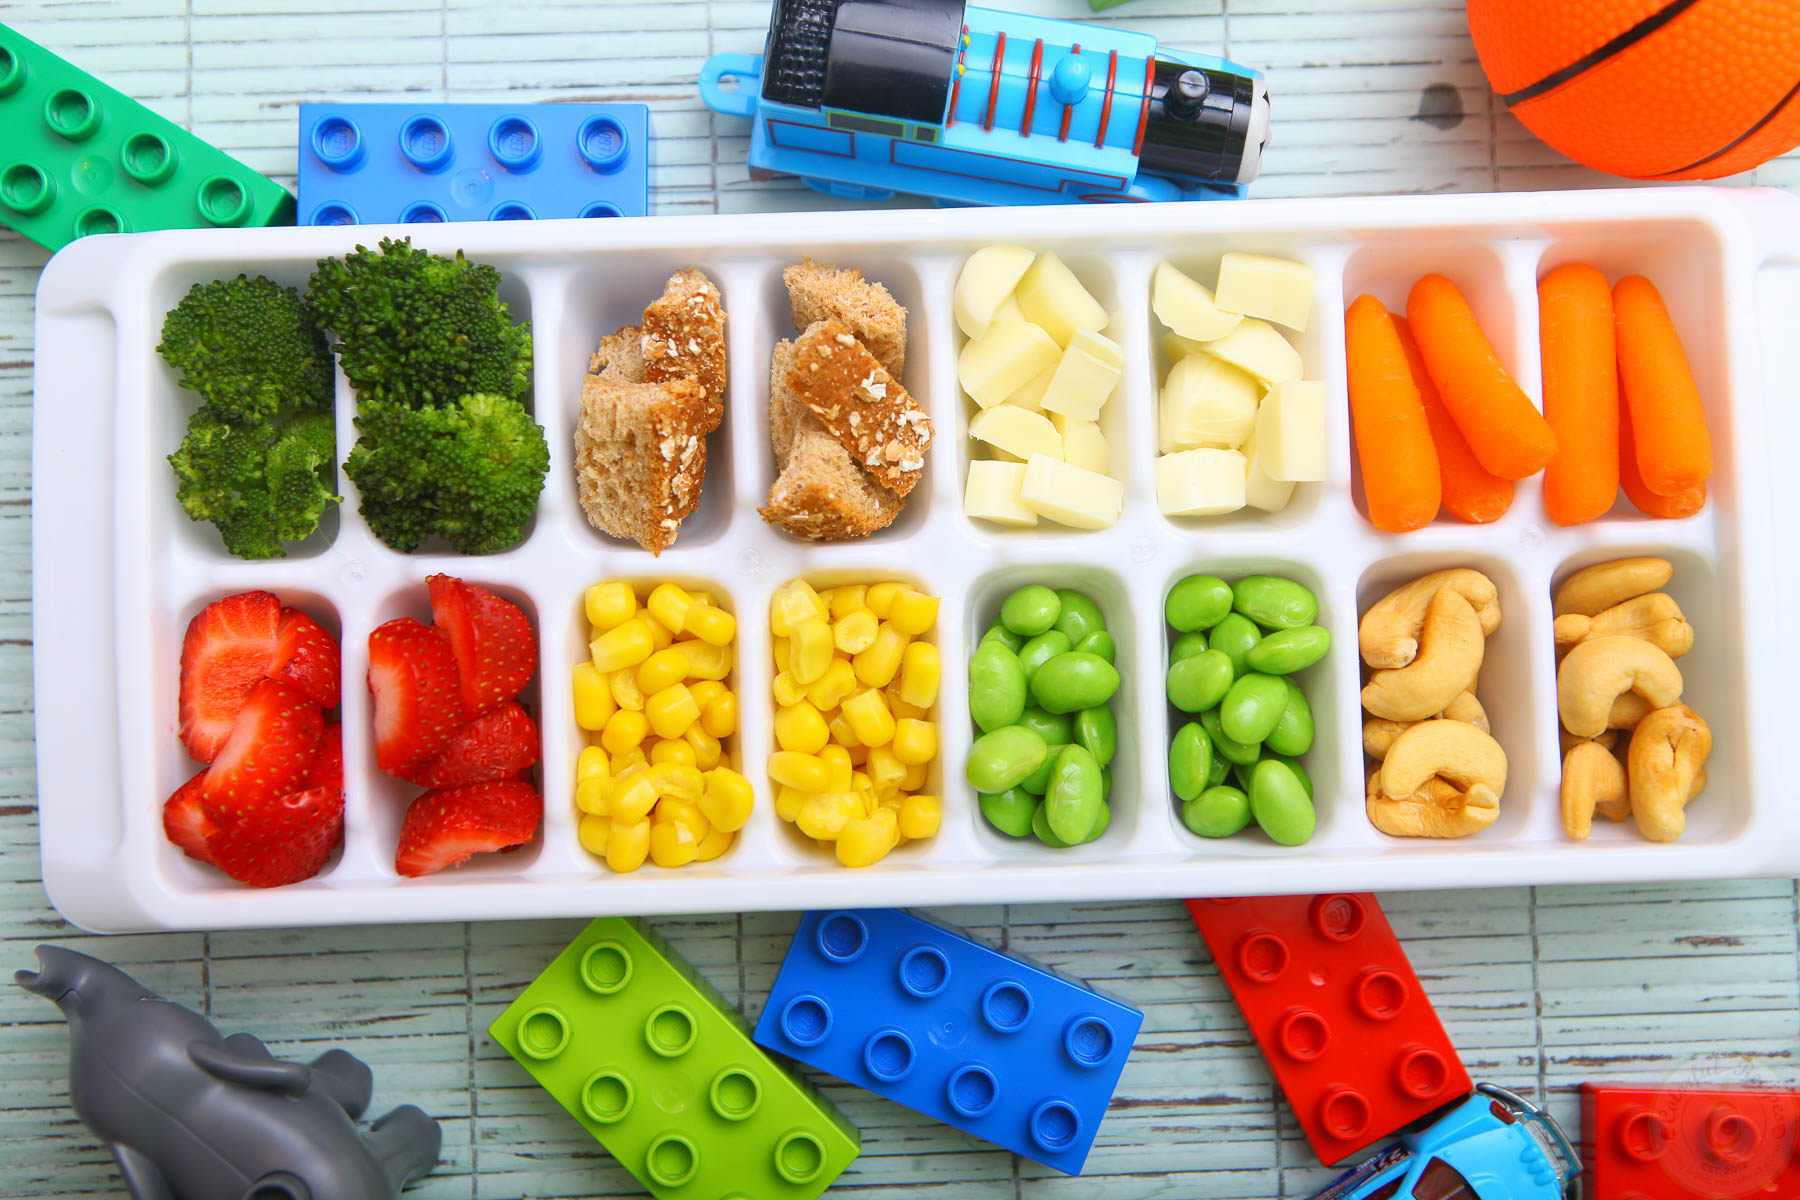 Toddler Approved Ice Cube Tray Colorful Buffet - Colorful Recipes